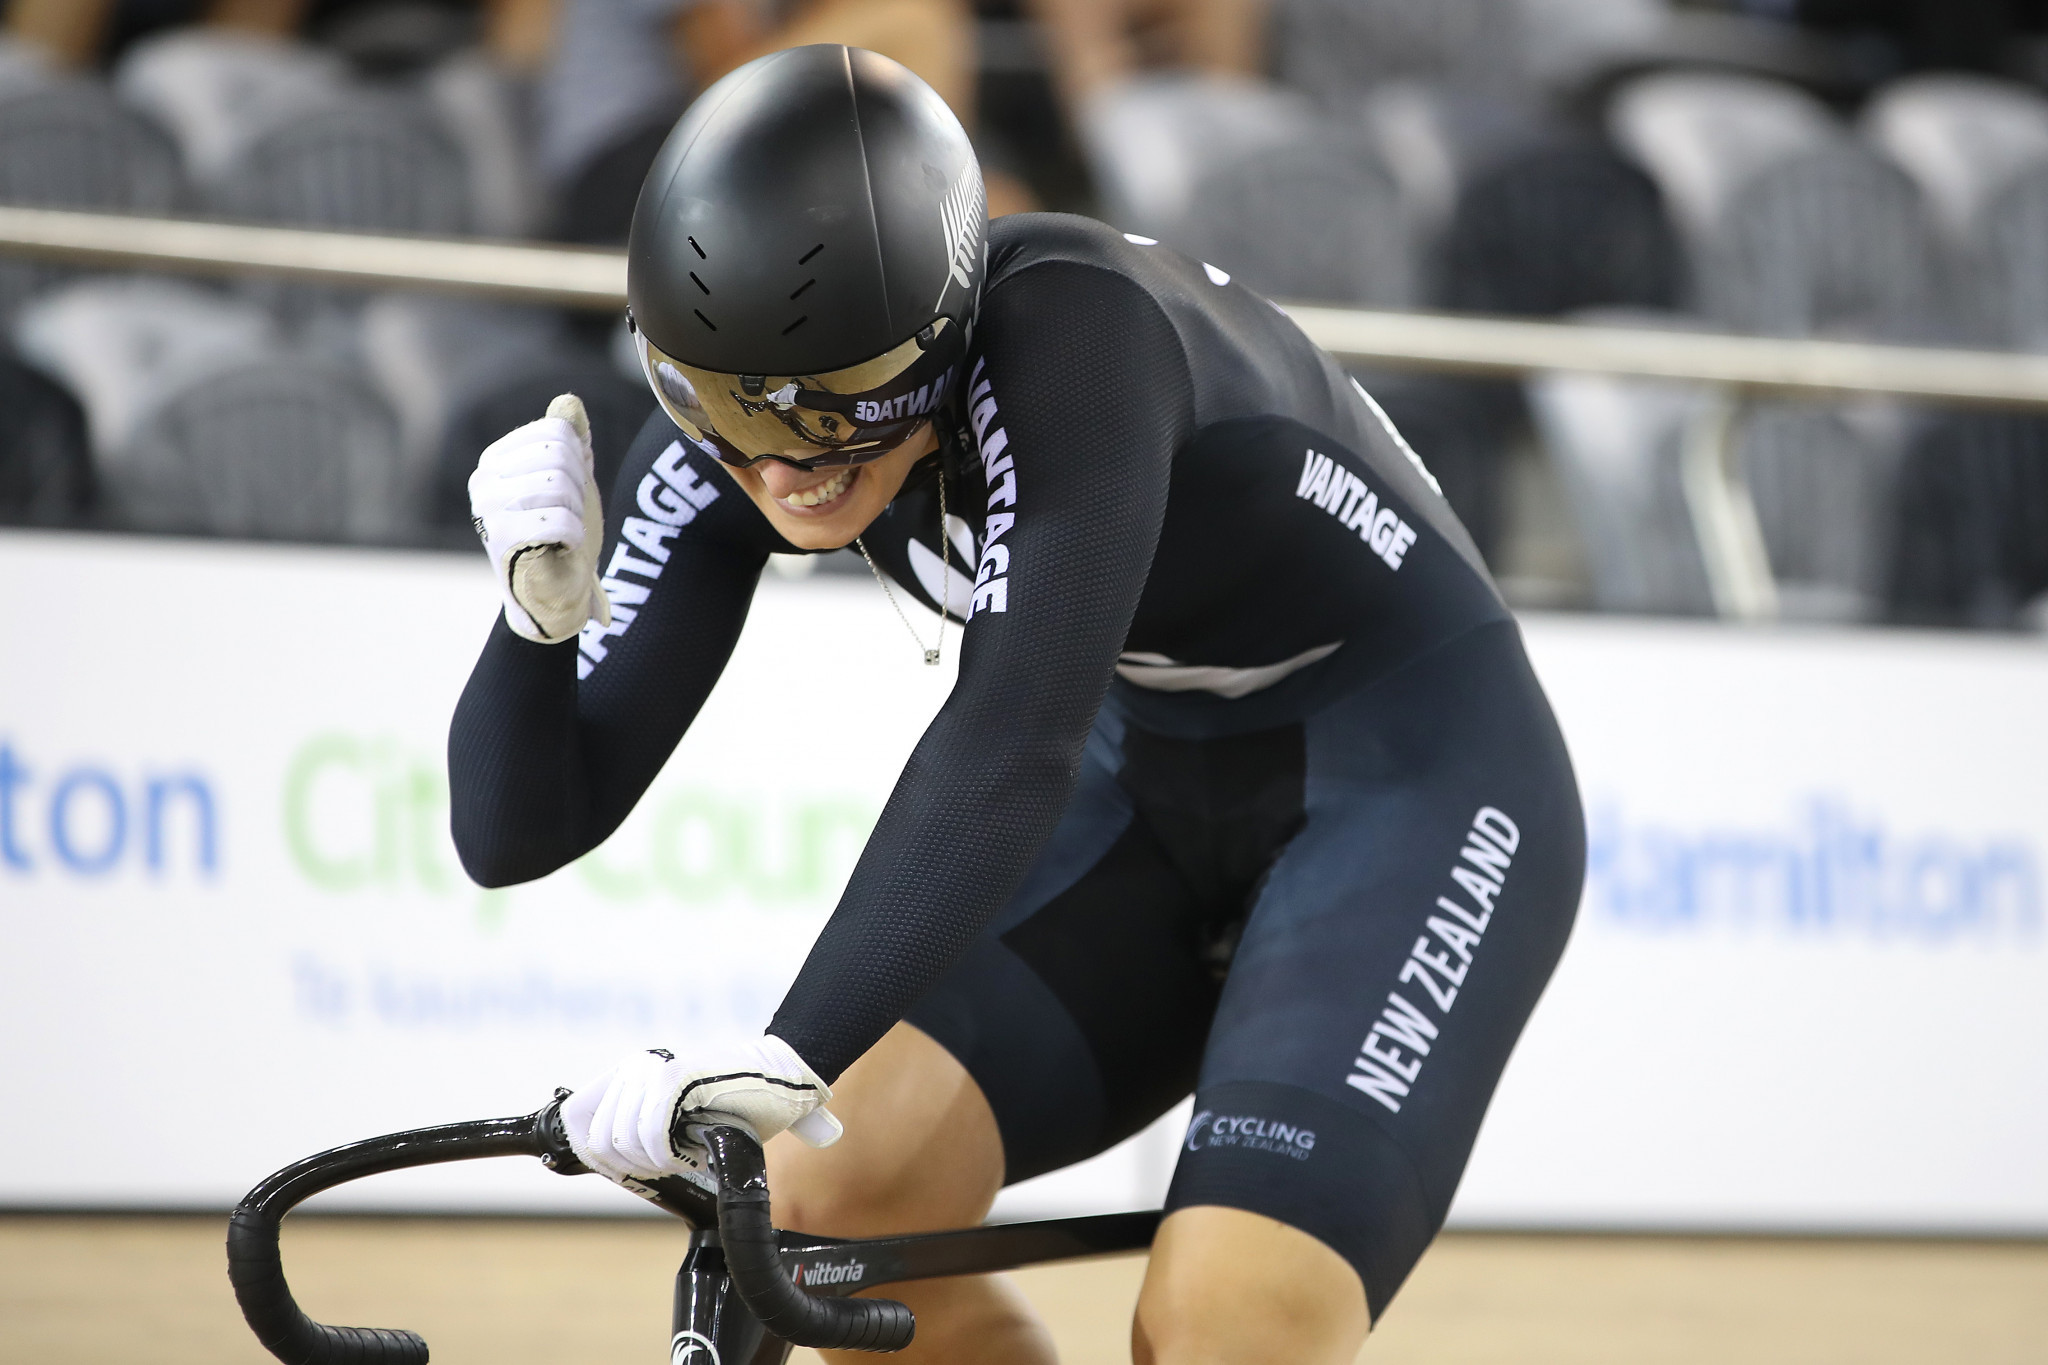 Podmore won the women's team sprint with Natasha Hansen at the Cambridge UCI Track World Cup in 2019 ©Getty Images